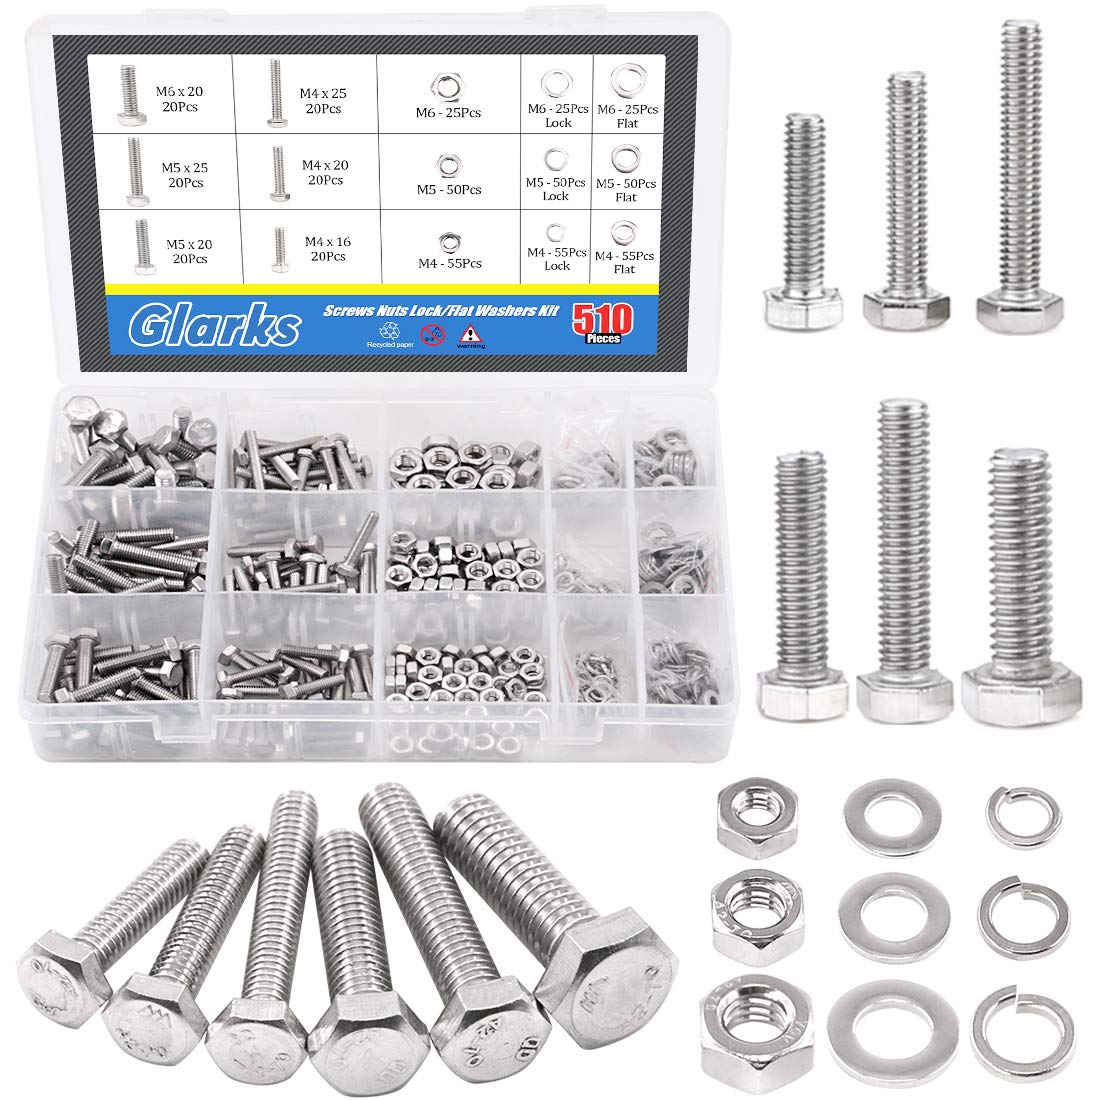 Glarks 280-Pieces M4 Pan Head Phillips Stainless Steel Screws Bolts Nuts Lock and Flat Gasket Washers Assortment Kit